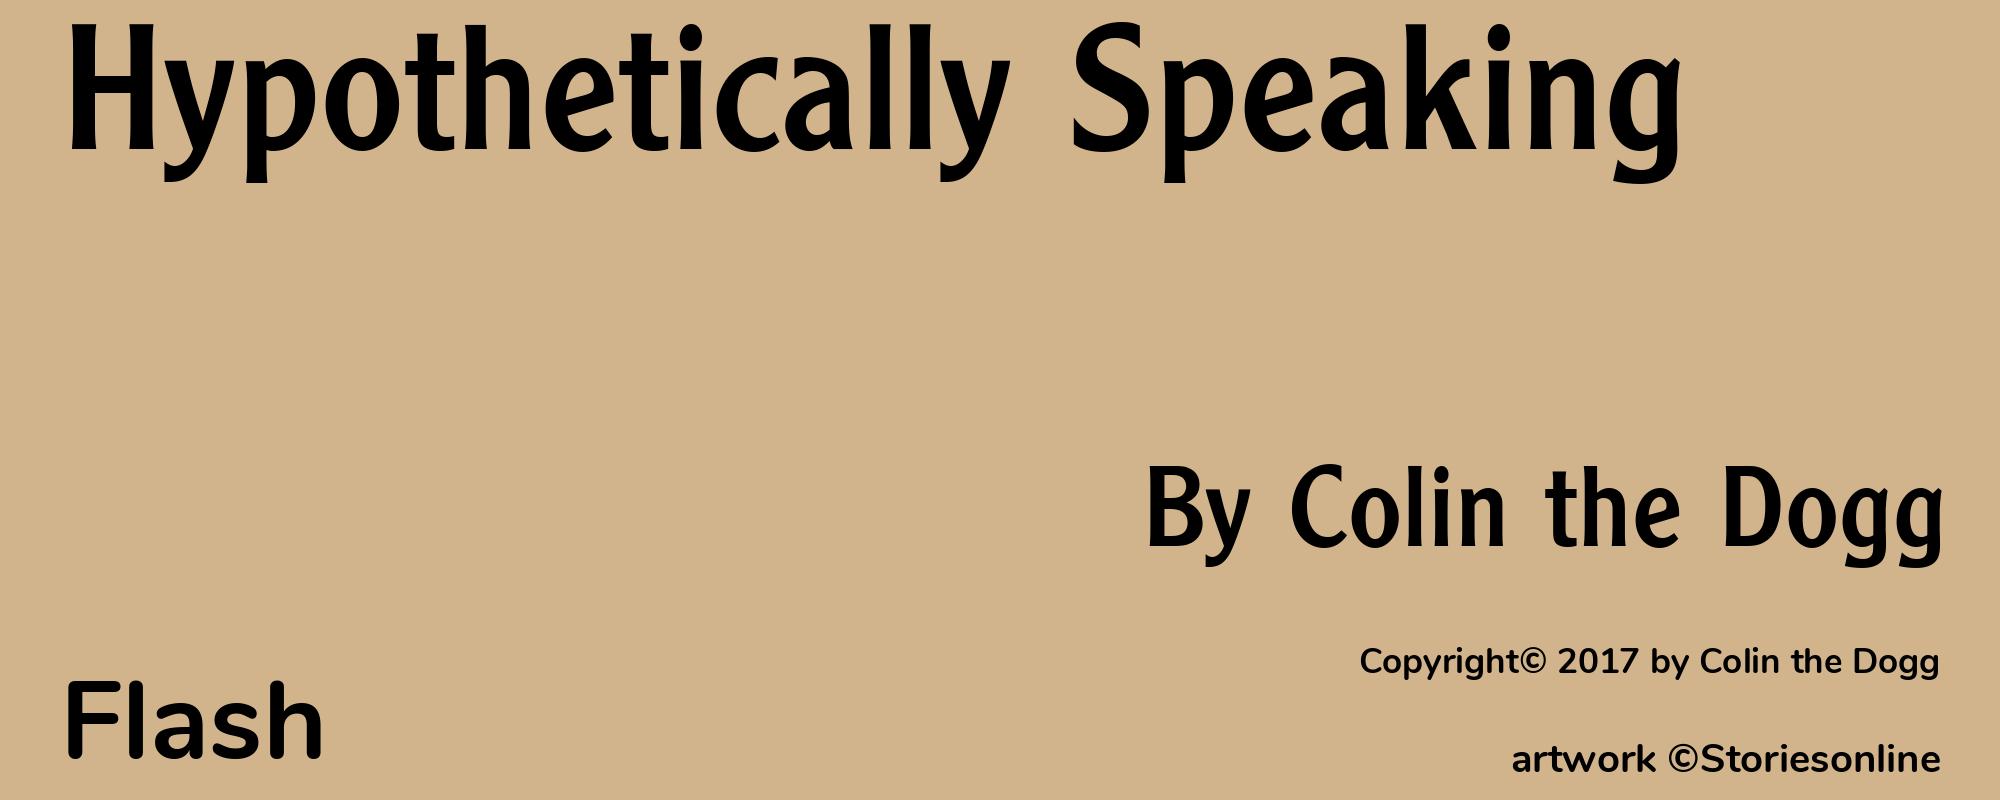 Hypothetically Speaking - Cover